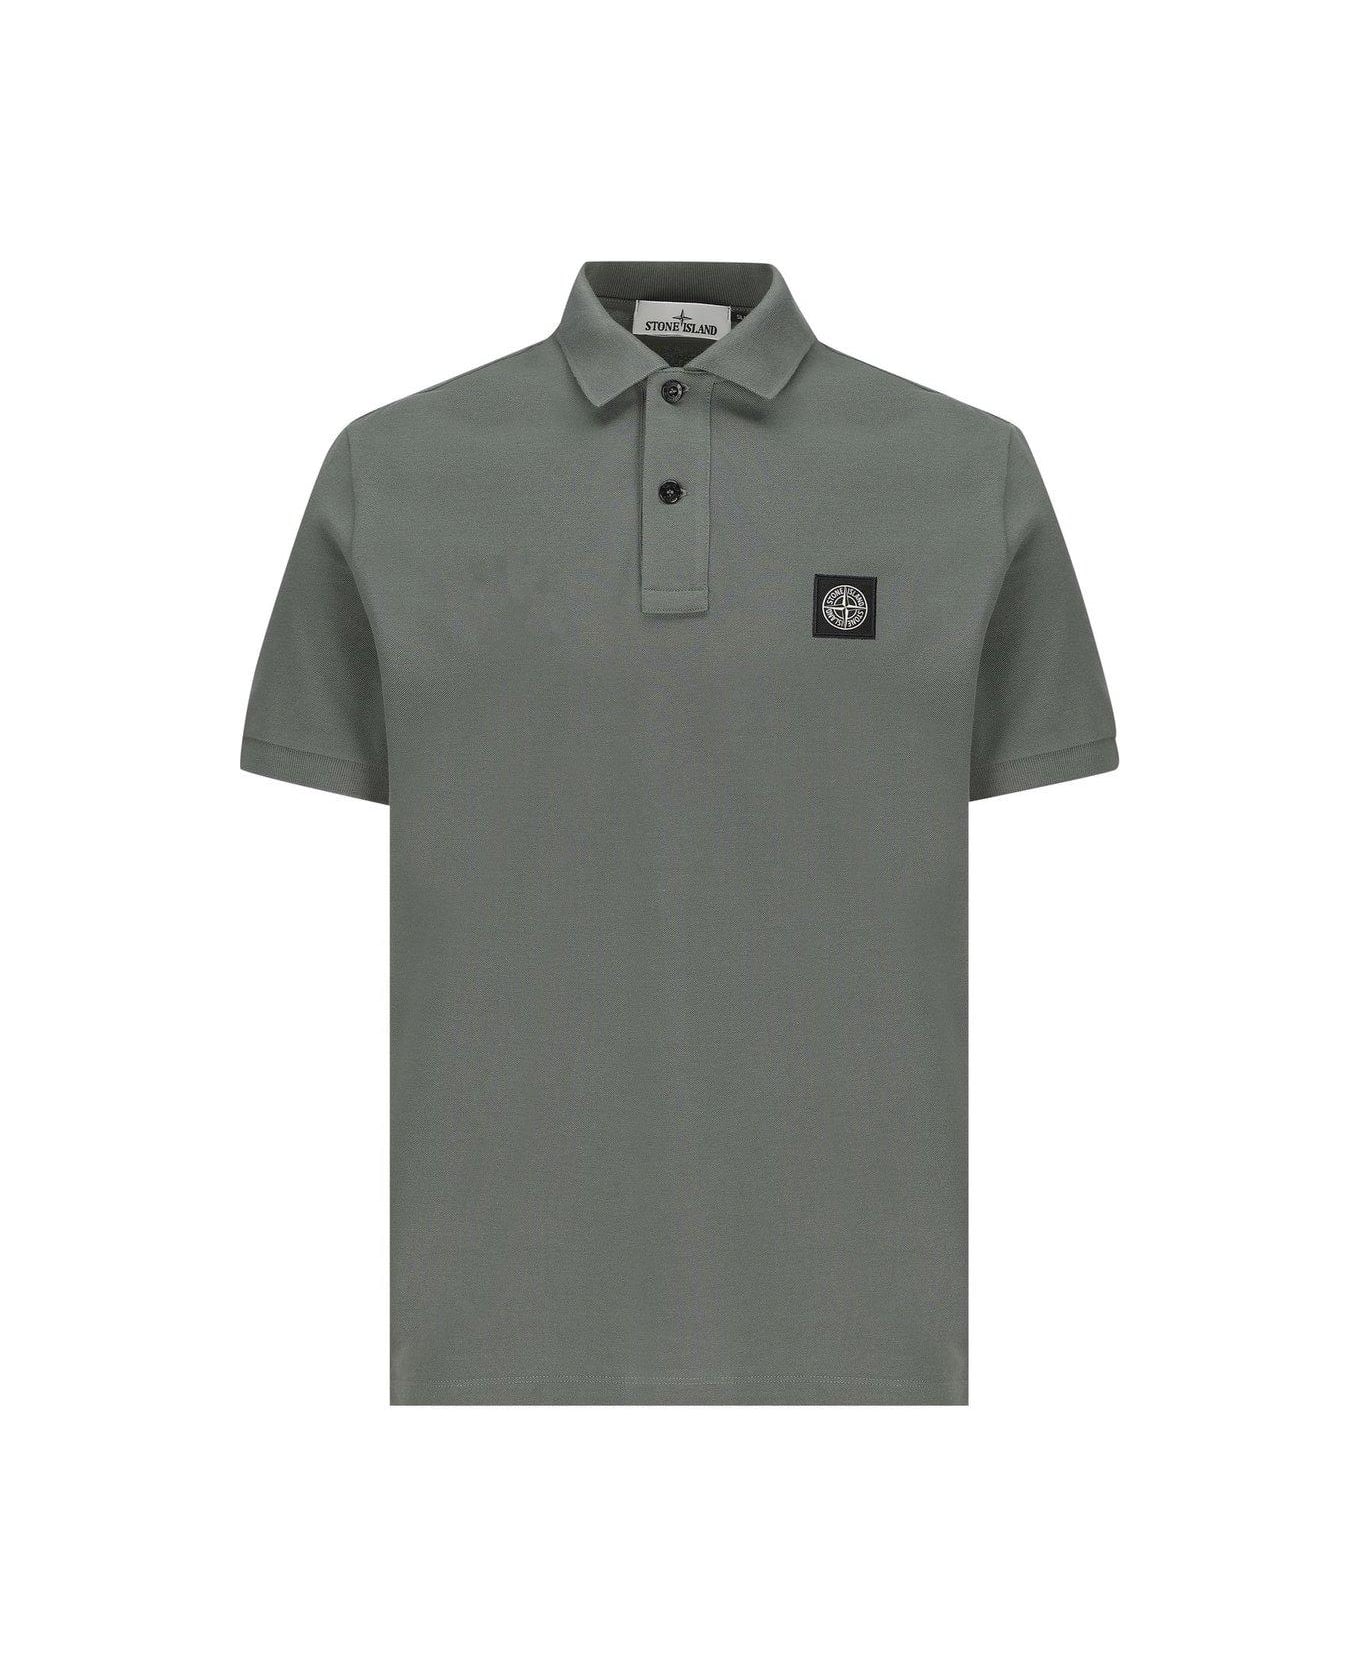 Stone Island Compass Patch Short-sleeved Polo Shirt - Green シャツ